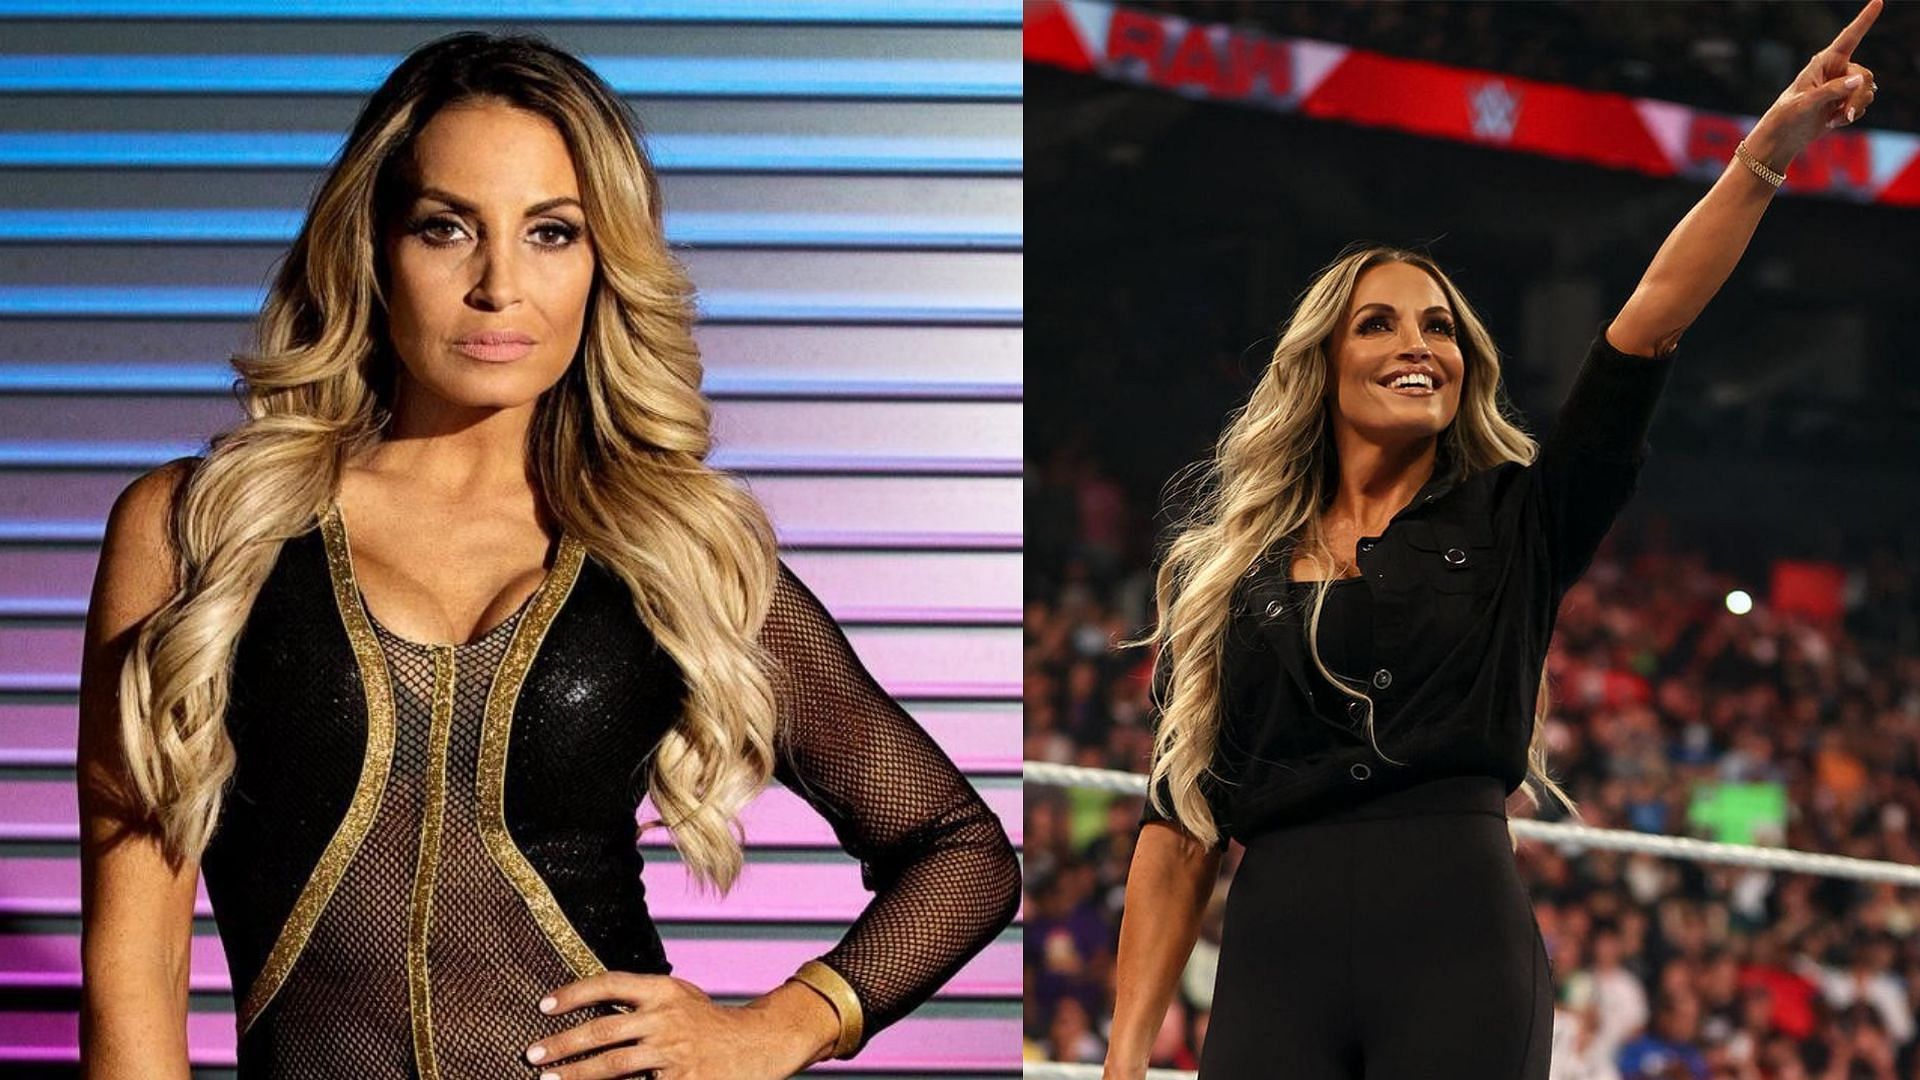 Backstage News on WWE Changing Plans for Becky Lynch vs. Trish Stratus